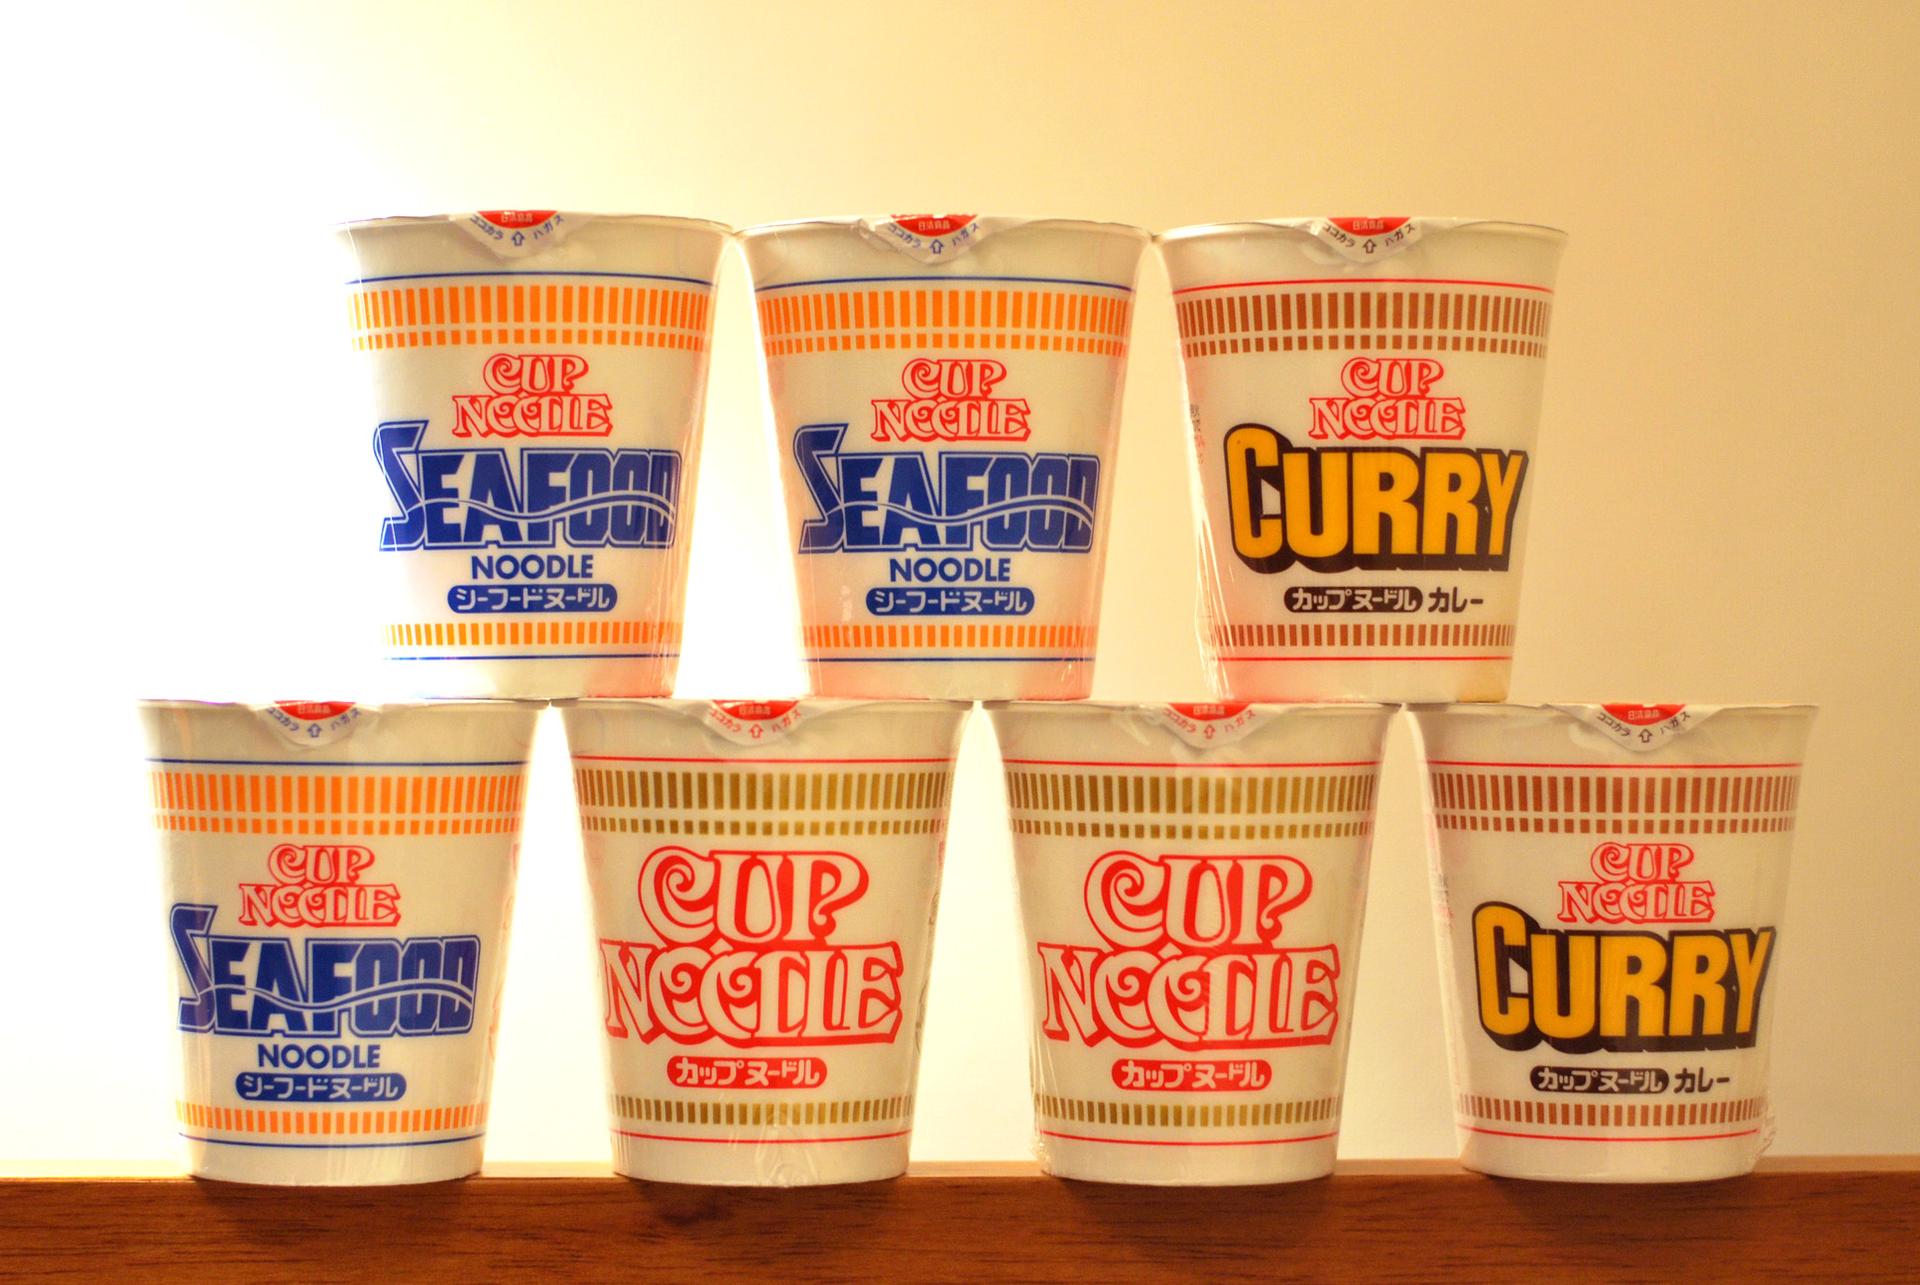 Cups of cups of noodles, showing original Japanese packaging